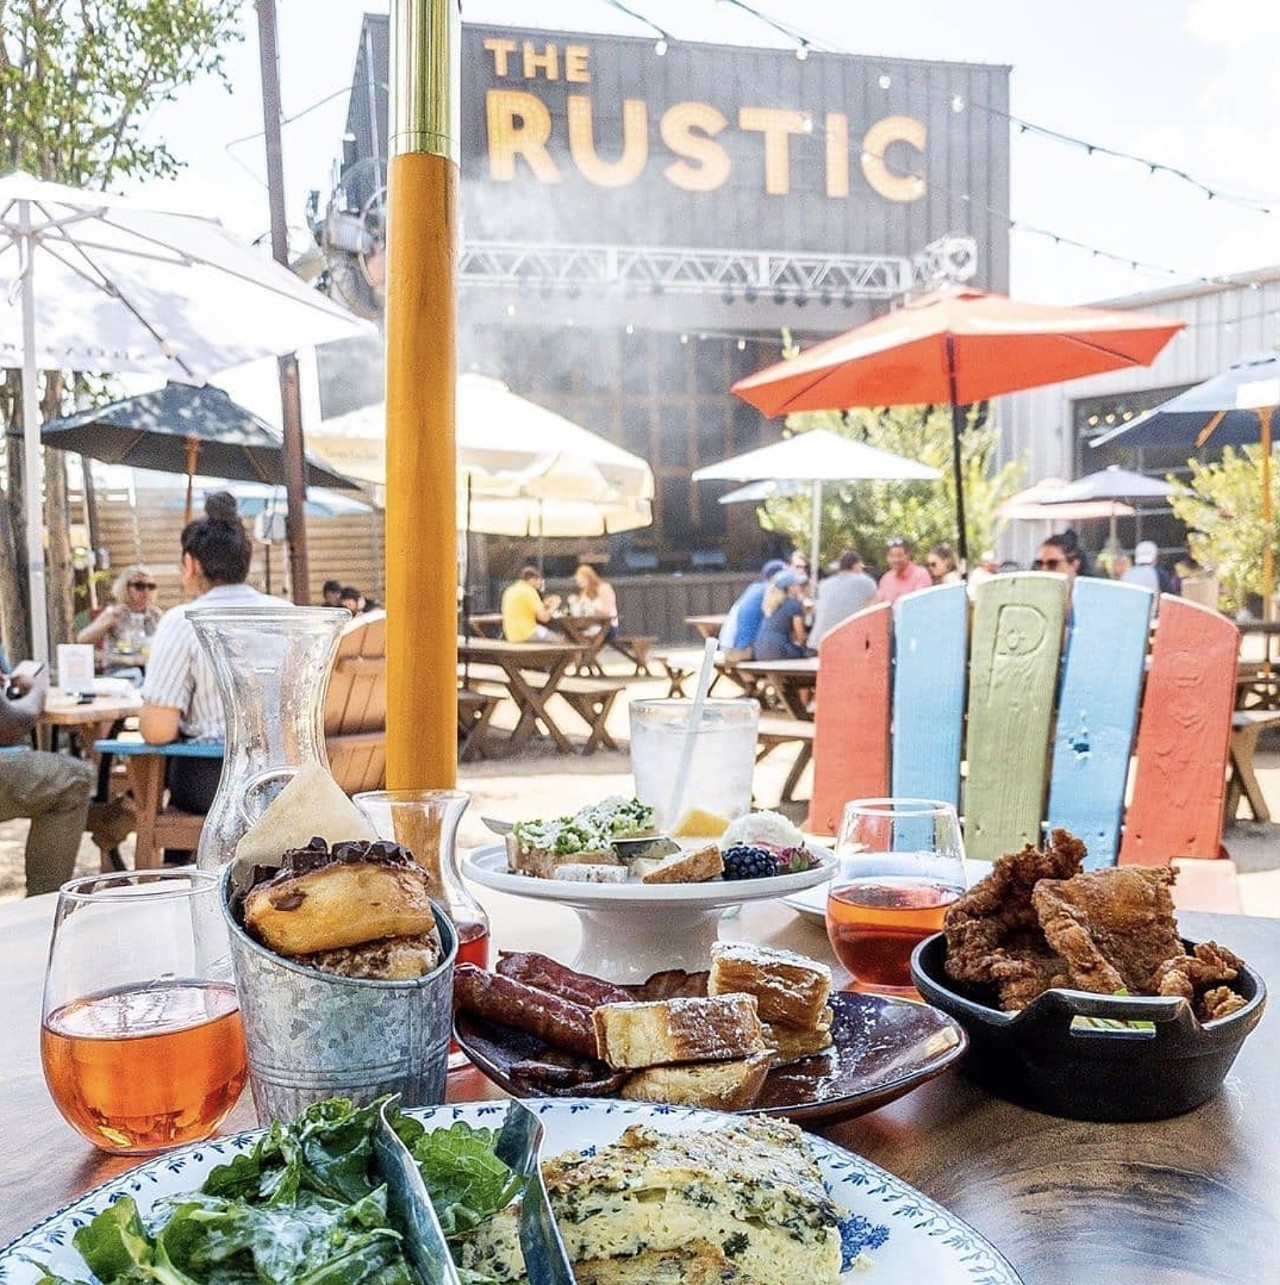 The Rustic
17619 La Cantera Parkway Unit 04, (210) 245-7500, therustic.com/san-antonio
Sitting right outside of the loop, The Rustic offers live music, a huge outdoor seating area and a diverse food menu.
Photo via Instagram / therusticsa